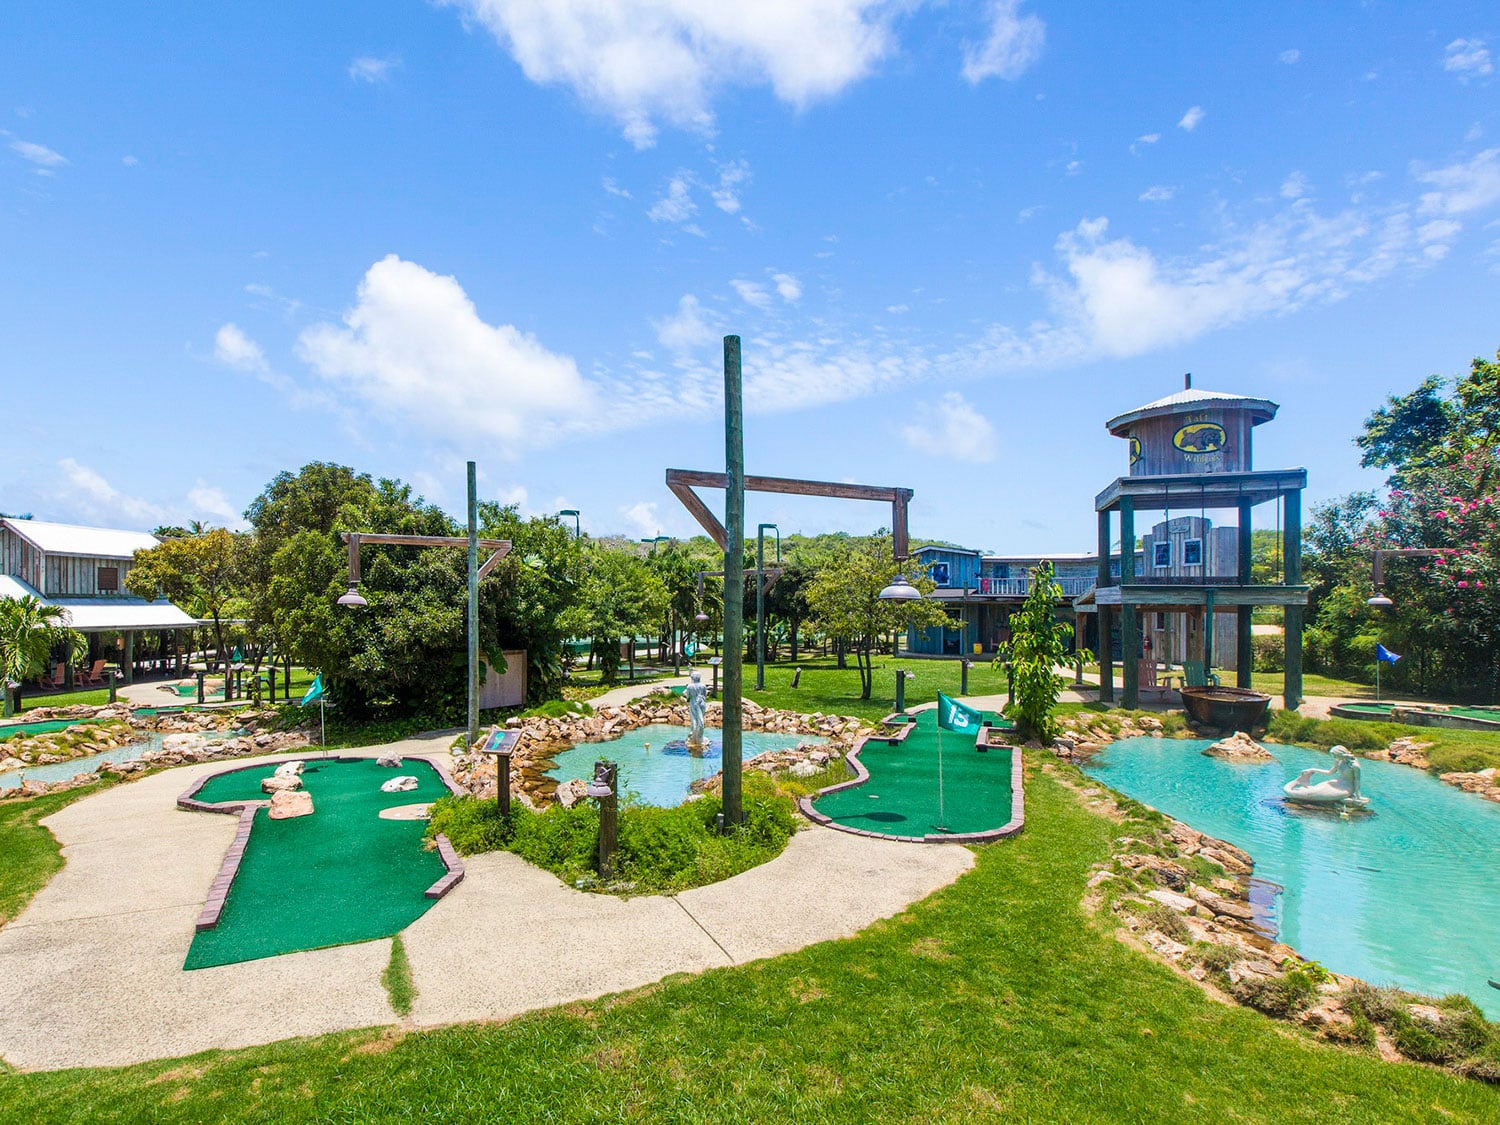 Verandah Resort and Spa in Antigua offers a variety of on-property games and activities for guests of all ages, including mini golf.